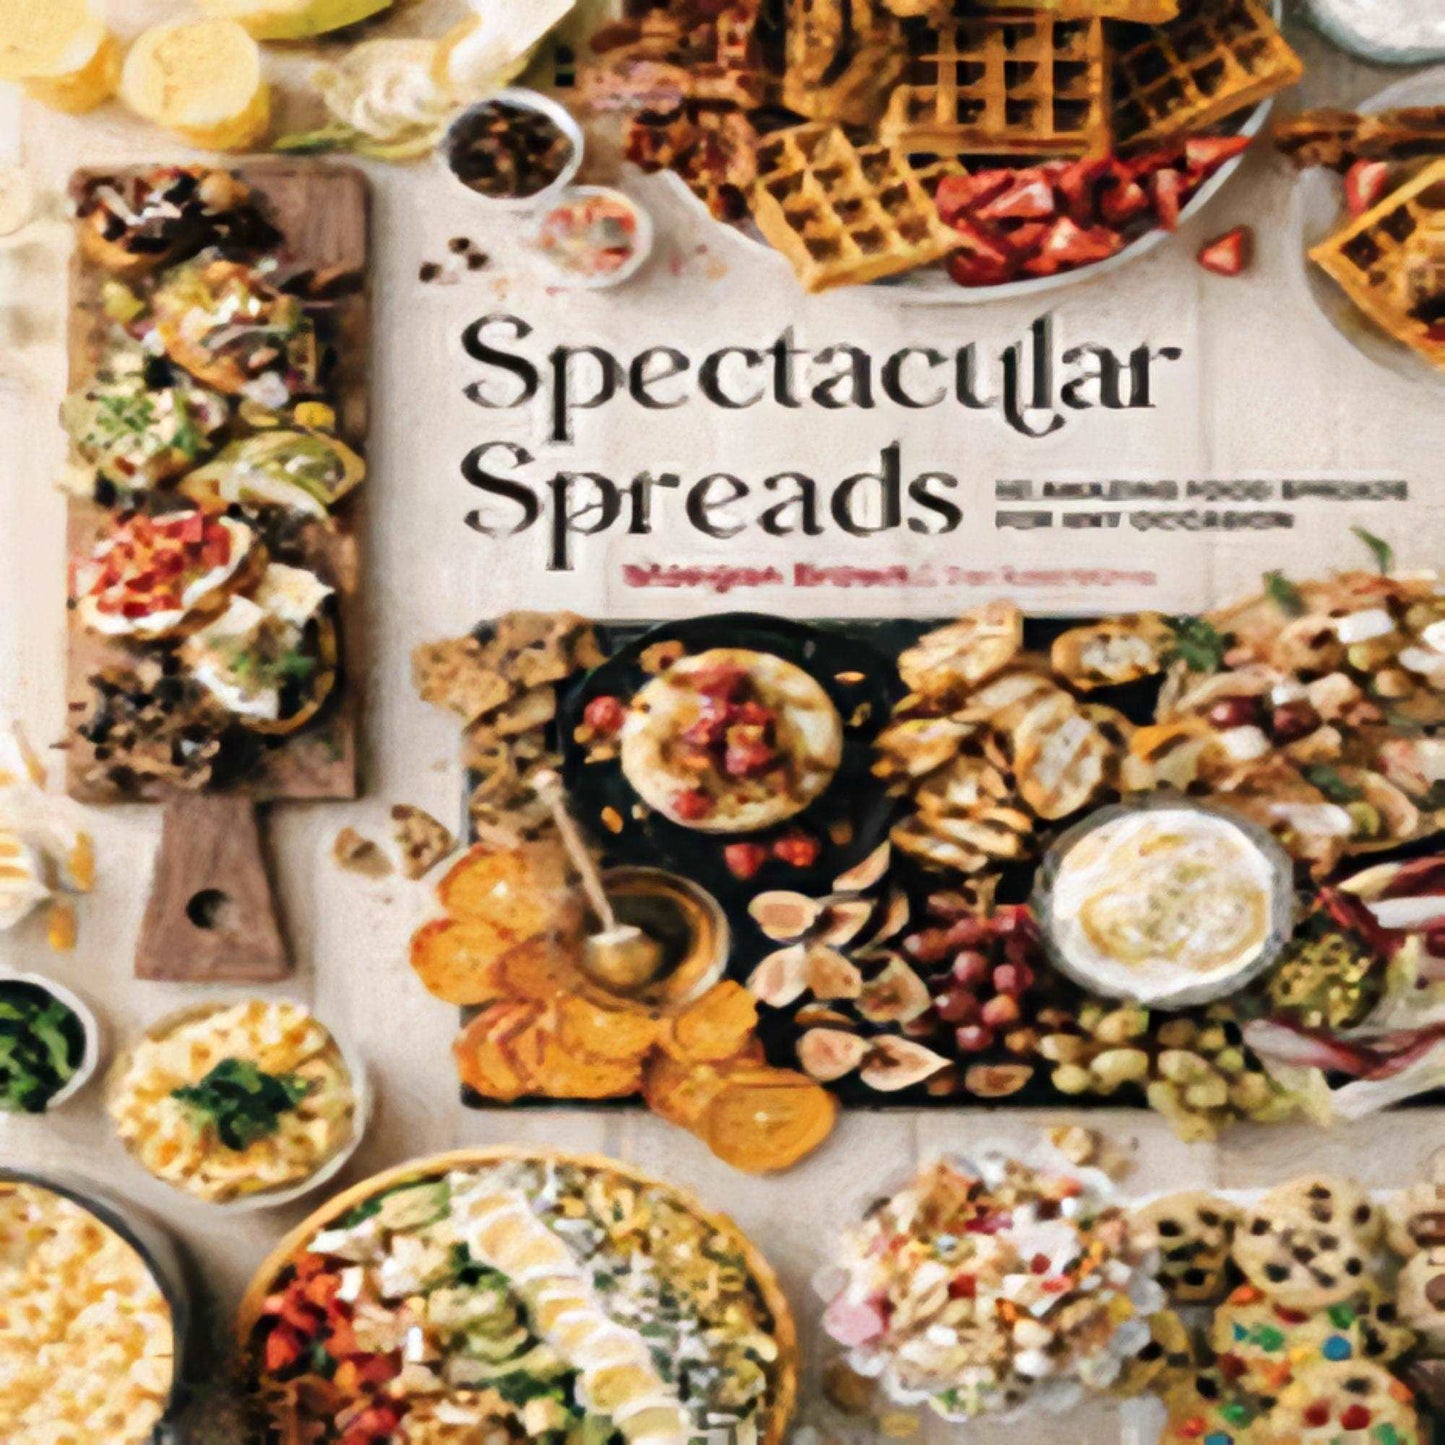 TEXTBOOK Spectacular Spreads: 50 Amazing Food Spreads for Any Occasion131-022223-1631067427DPGBOOKSTORE.COM. Today's Bestsellers.